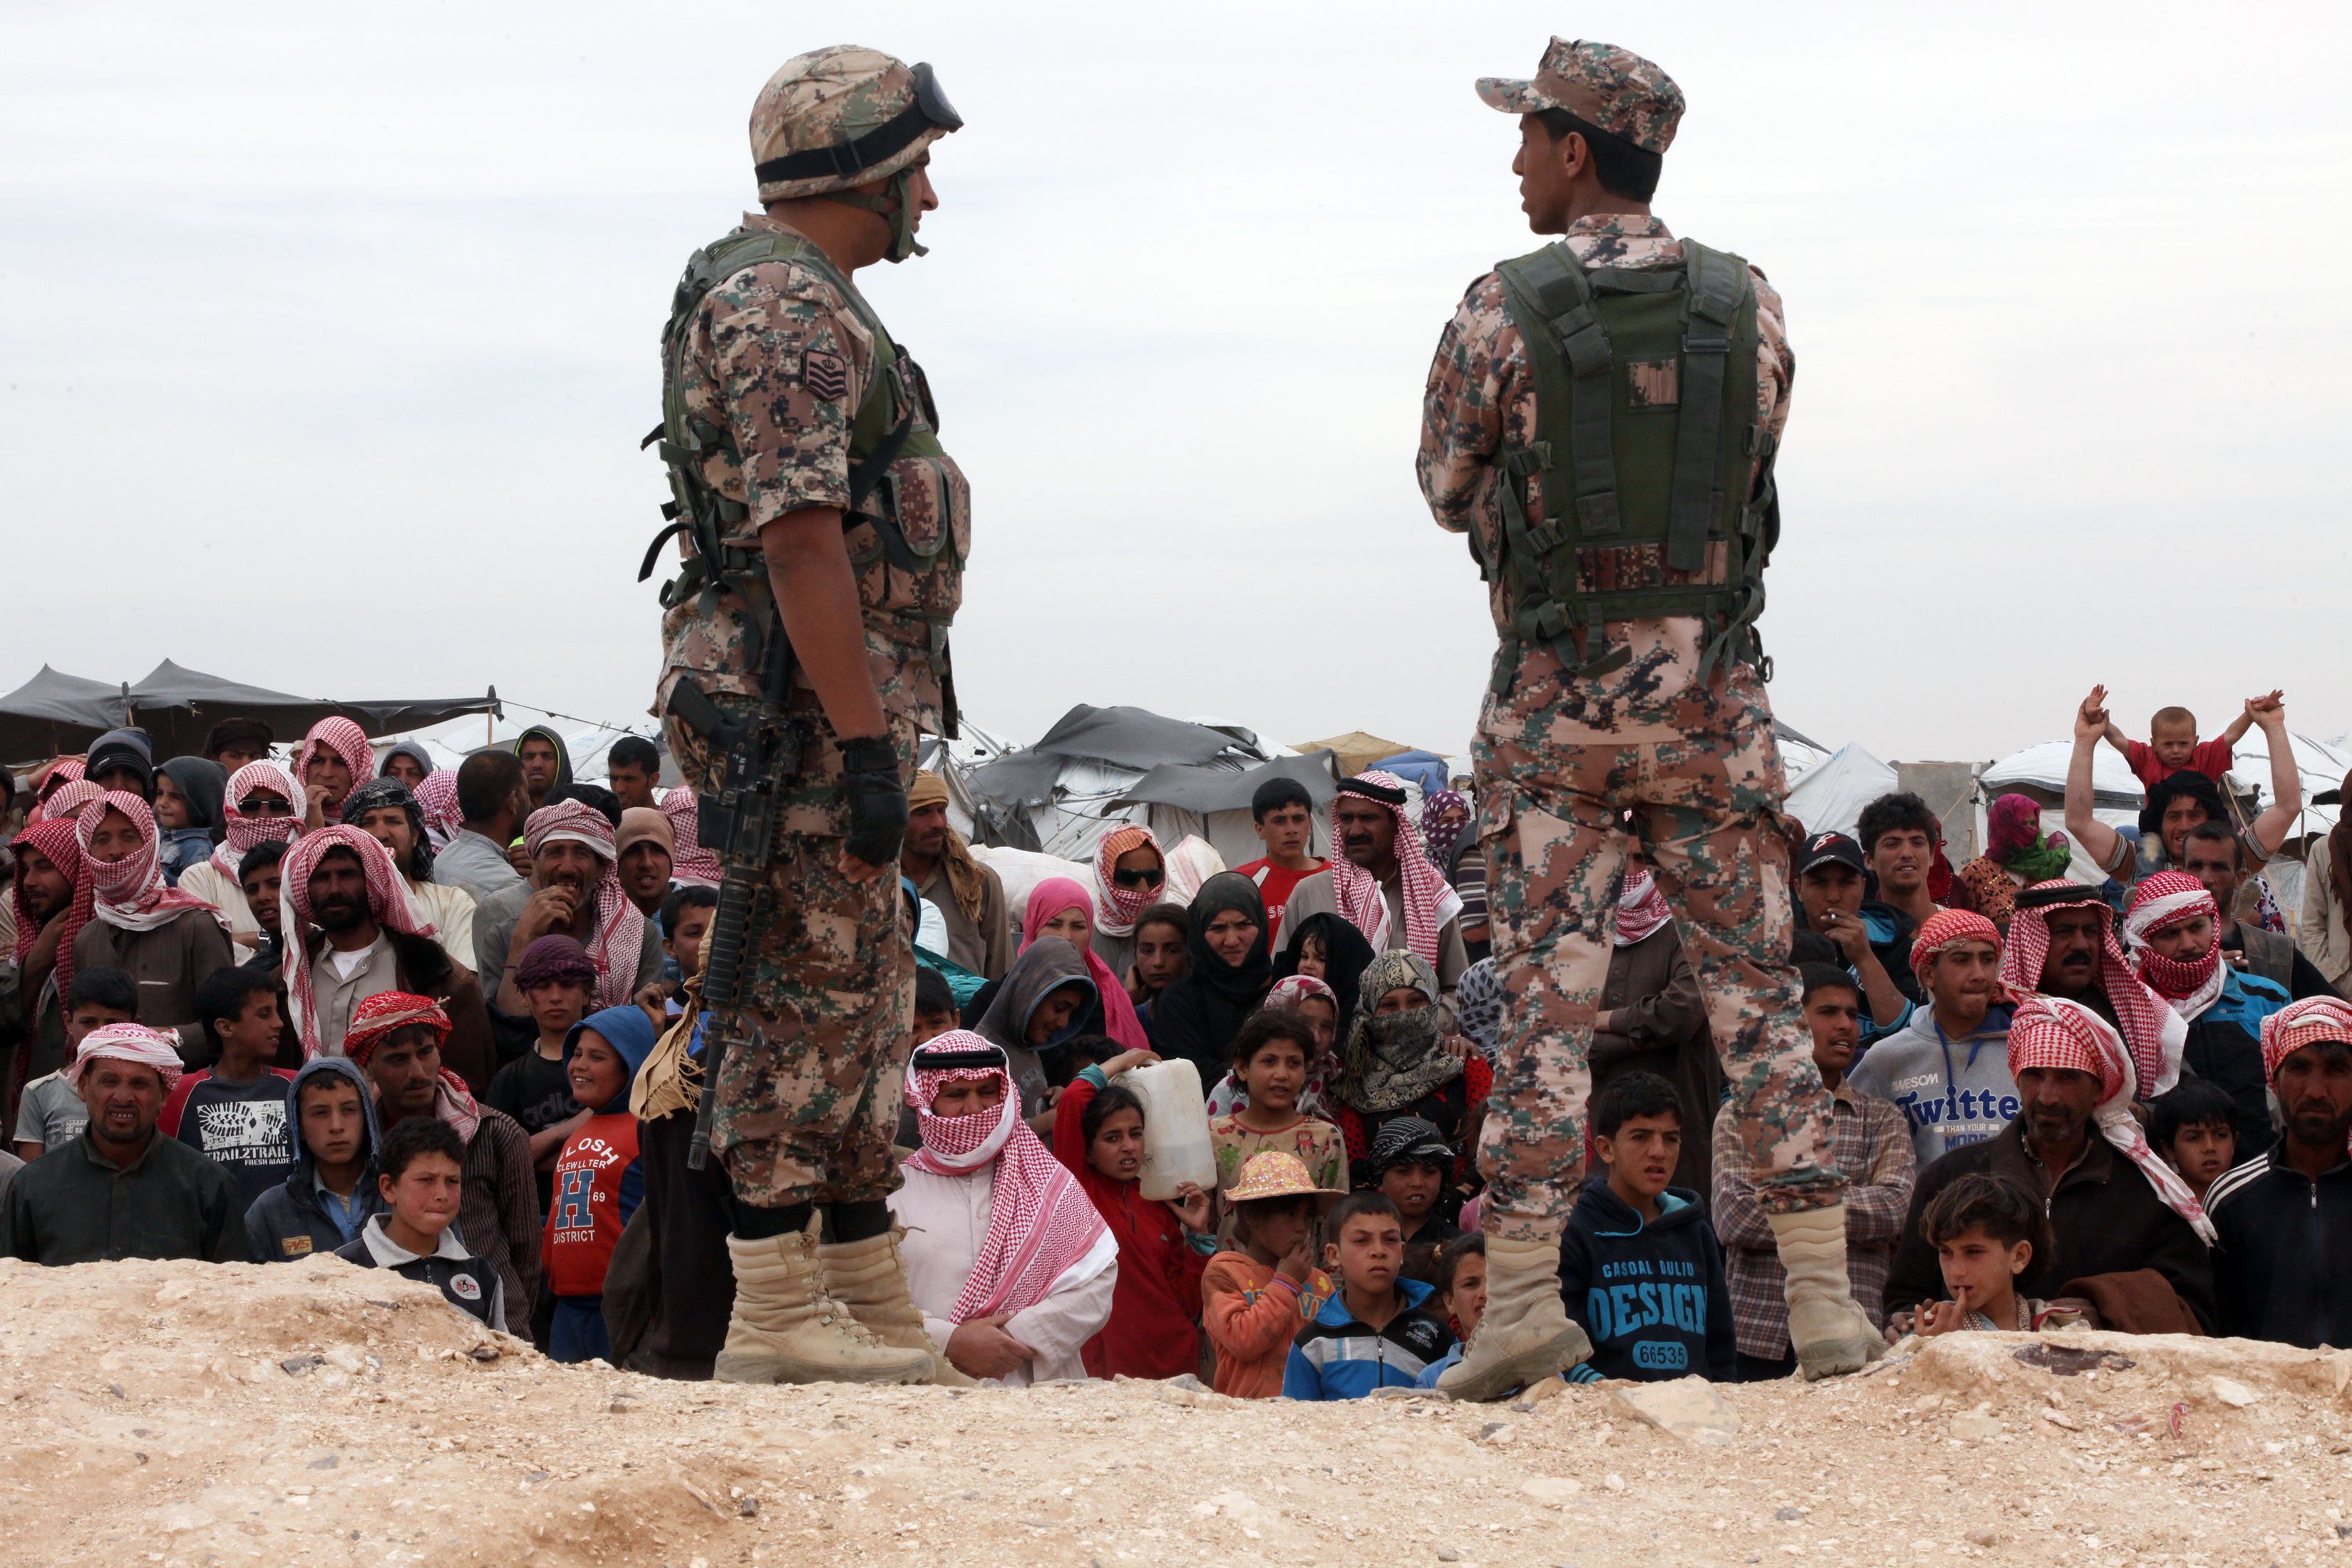 Soldiers stand near Syrian refugees who have arrived at the Jordanian military crossing point of Hadalat at the border with Syria after a long walk through the Syrian desert in Hadalat, Jordan, on May 4, 2016. (Jordan Pix—Getty Images)